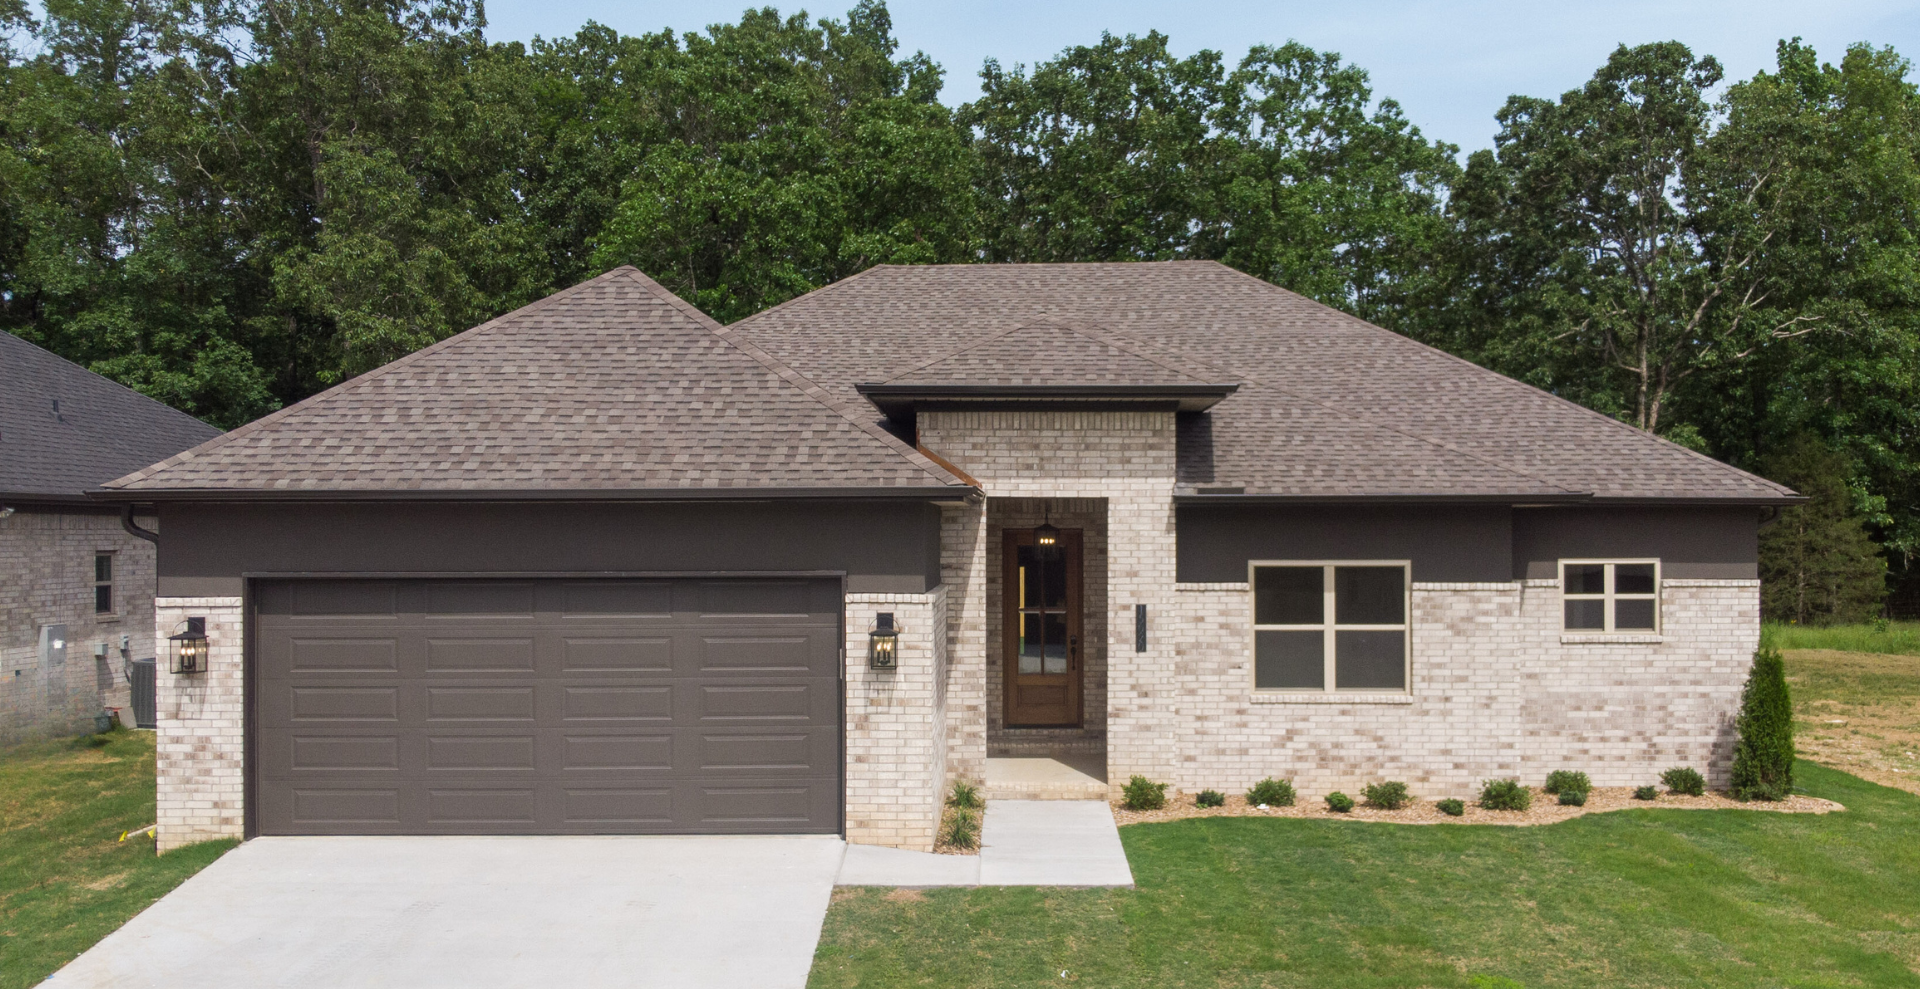 new construction home with dark roof, white garage door, and lighter brick. single level house